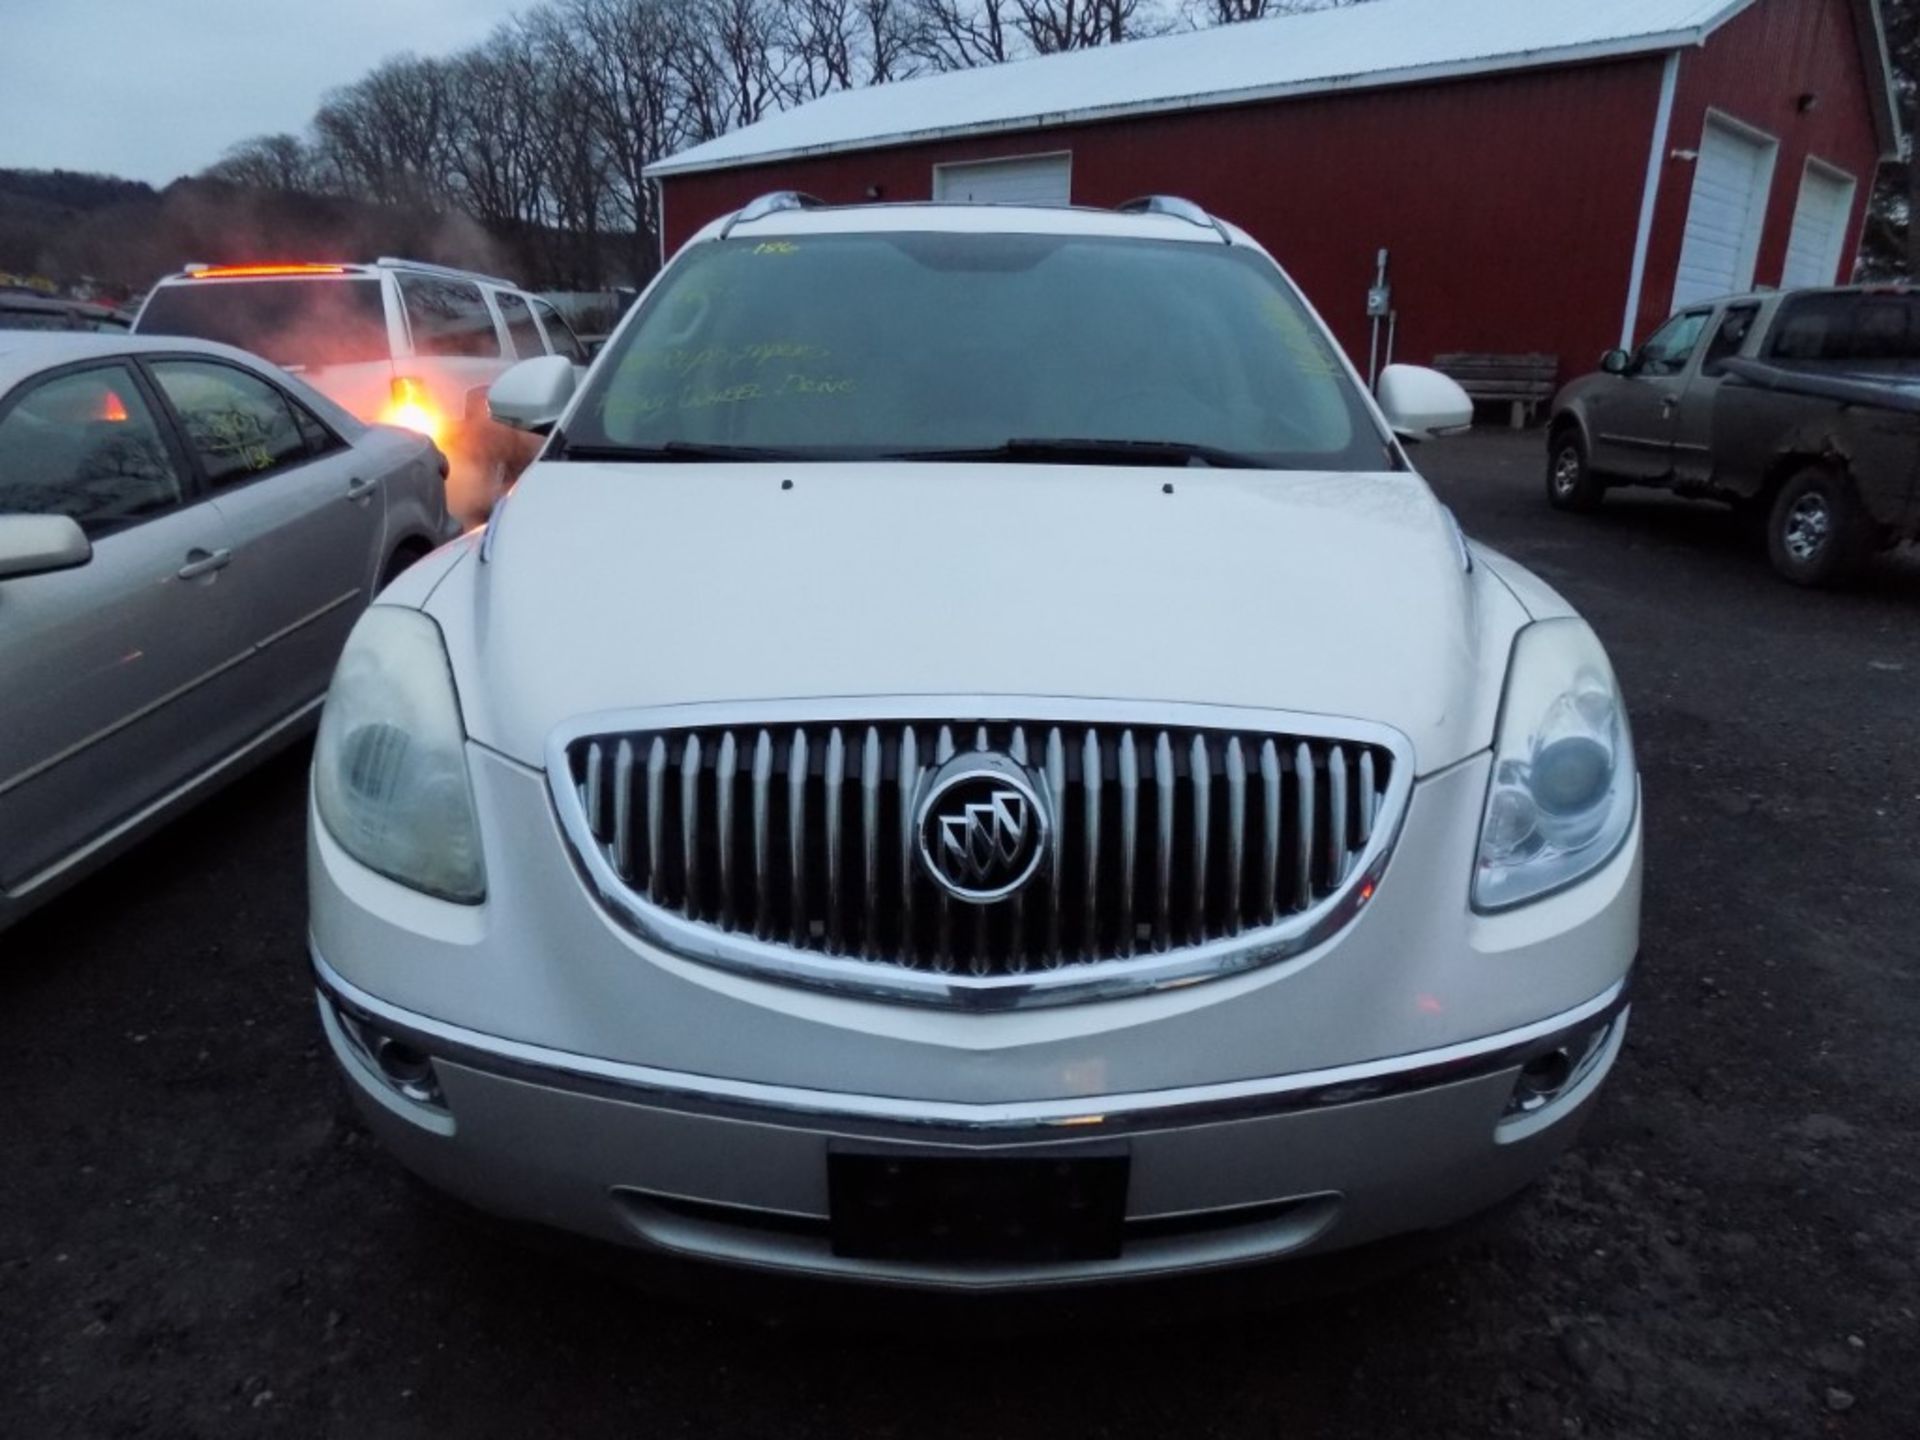 2011 Buick Enclave CXL-1, Leather, Sunroof, Front Wheel Drive, White, 160,845 Mi, PASSENGER FRONT - Image 3 of 13